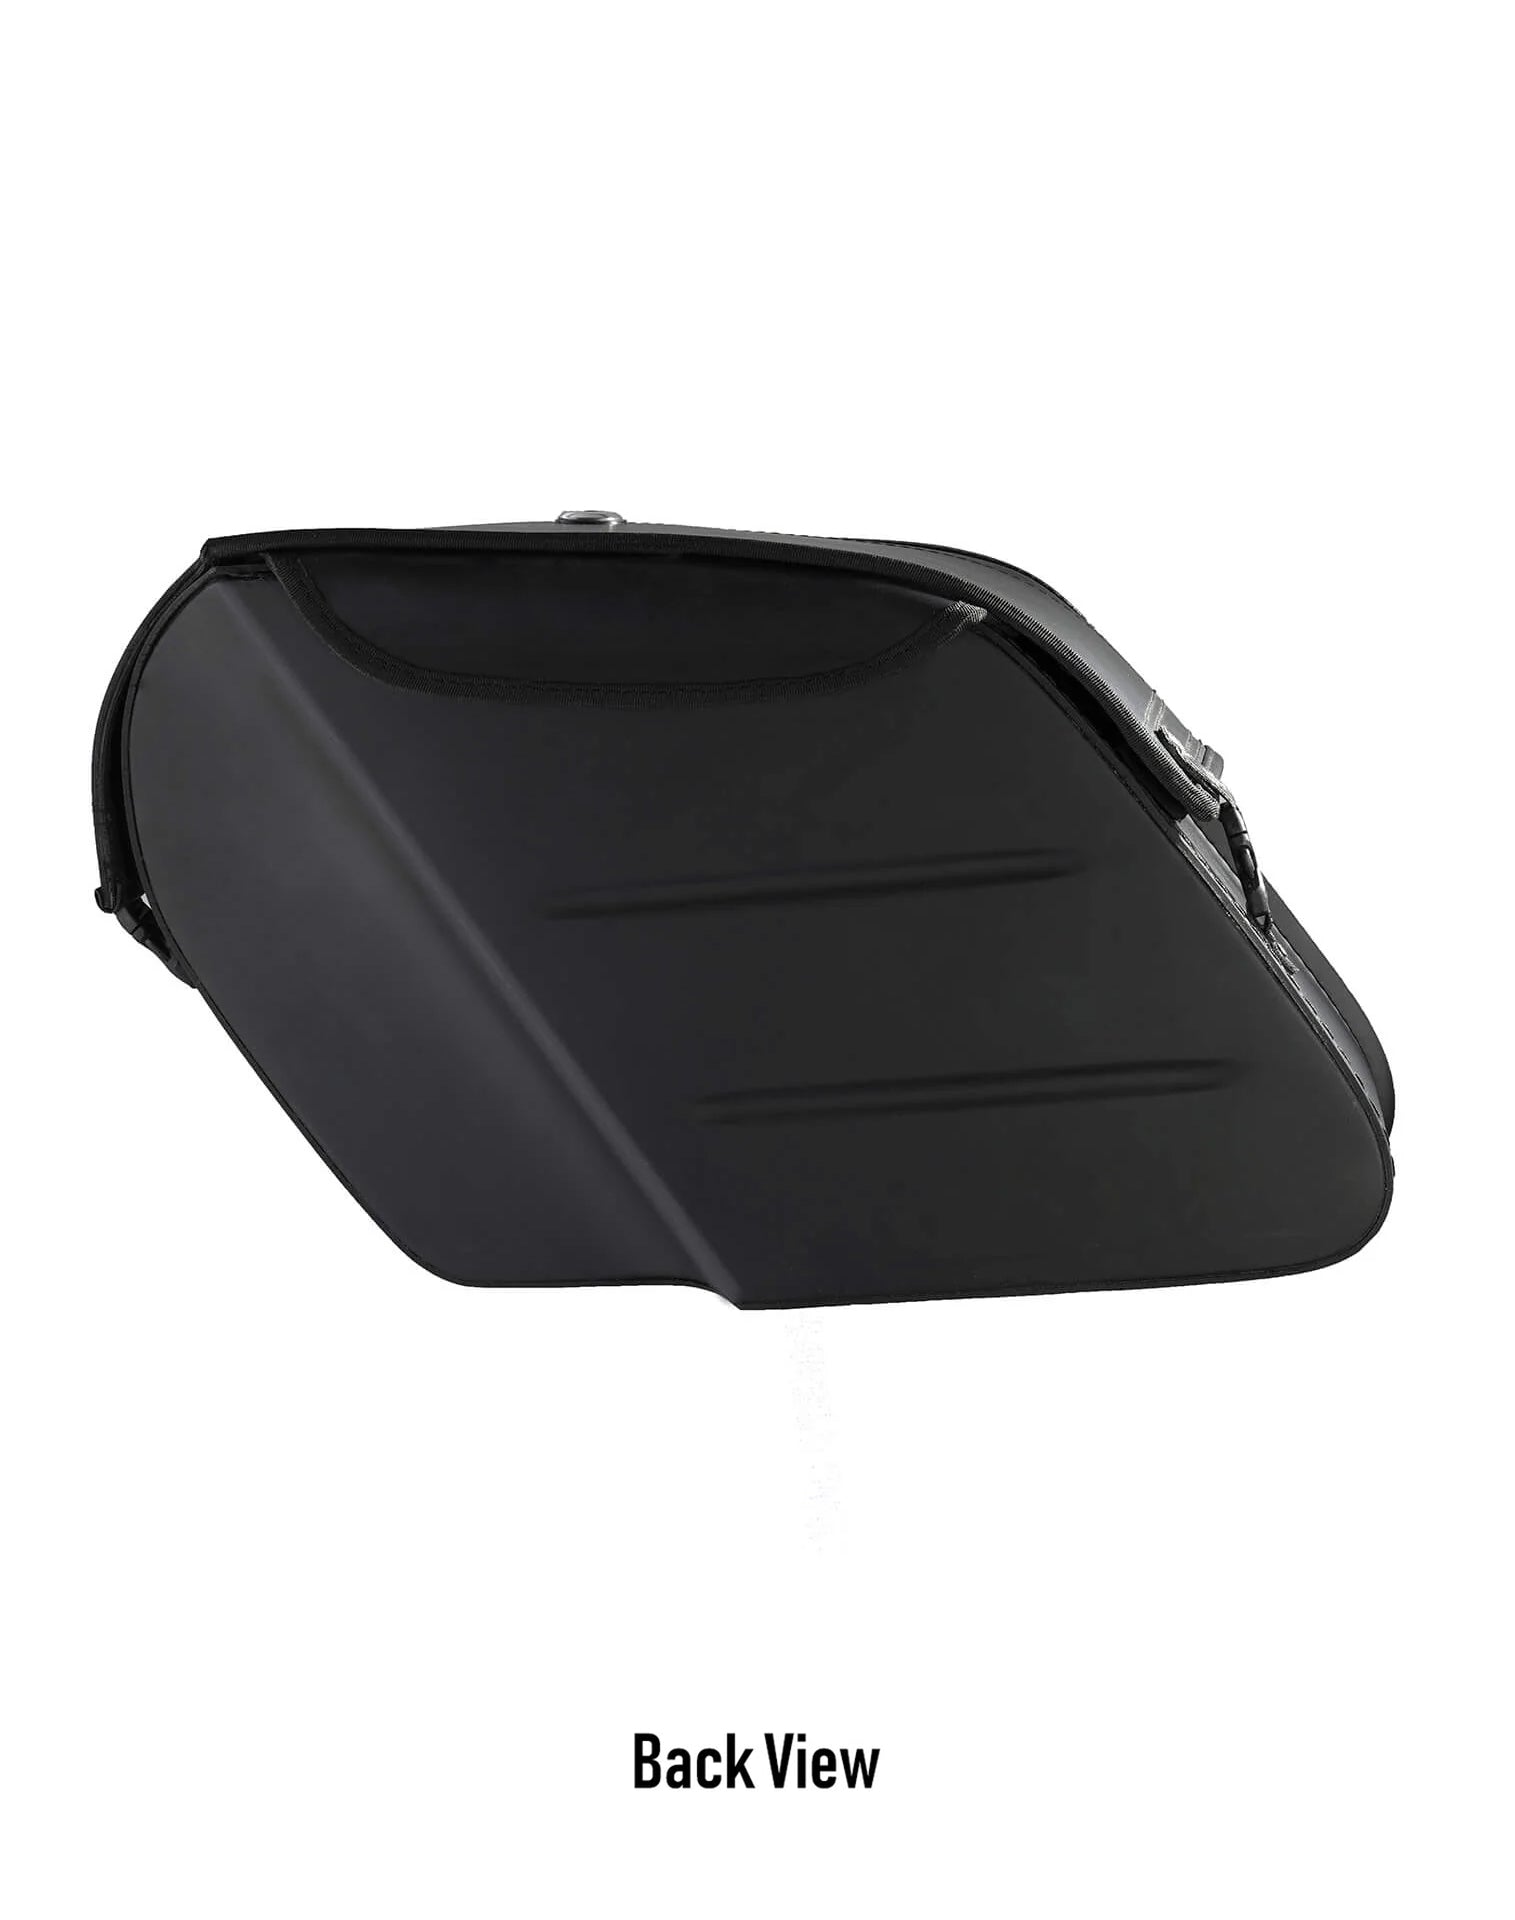 Viking Raven Extra Large Triumph Rocket Iii Classic Shock Cut Out Leather Motorcycle Saddlebags are Durable